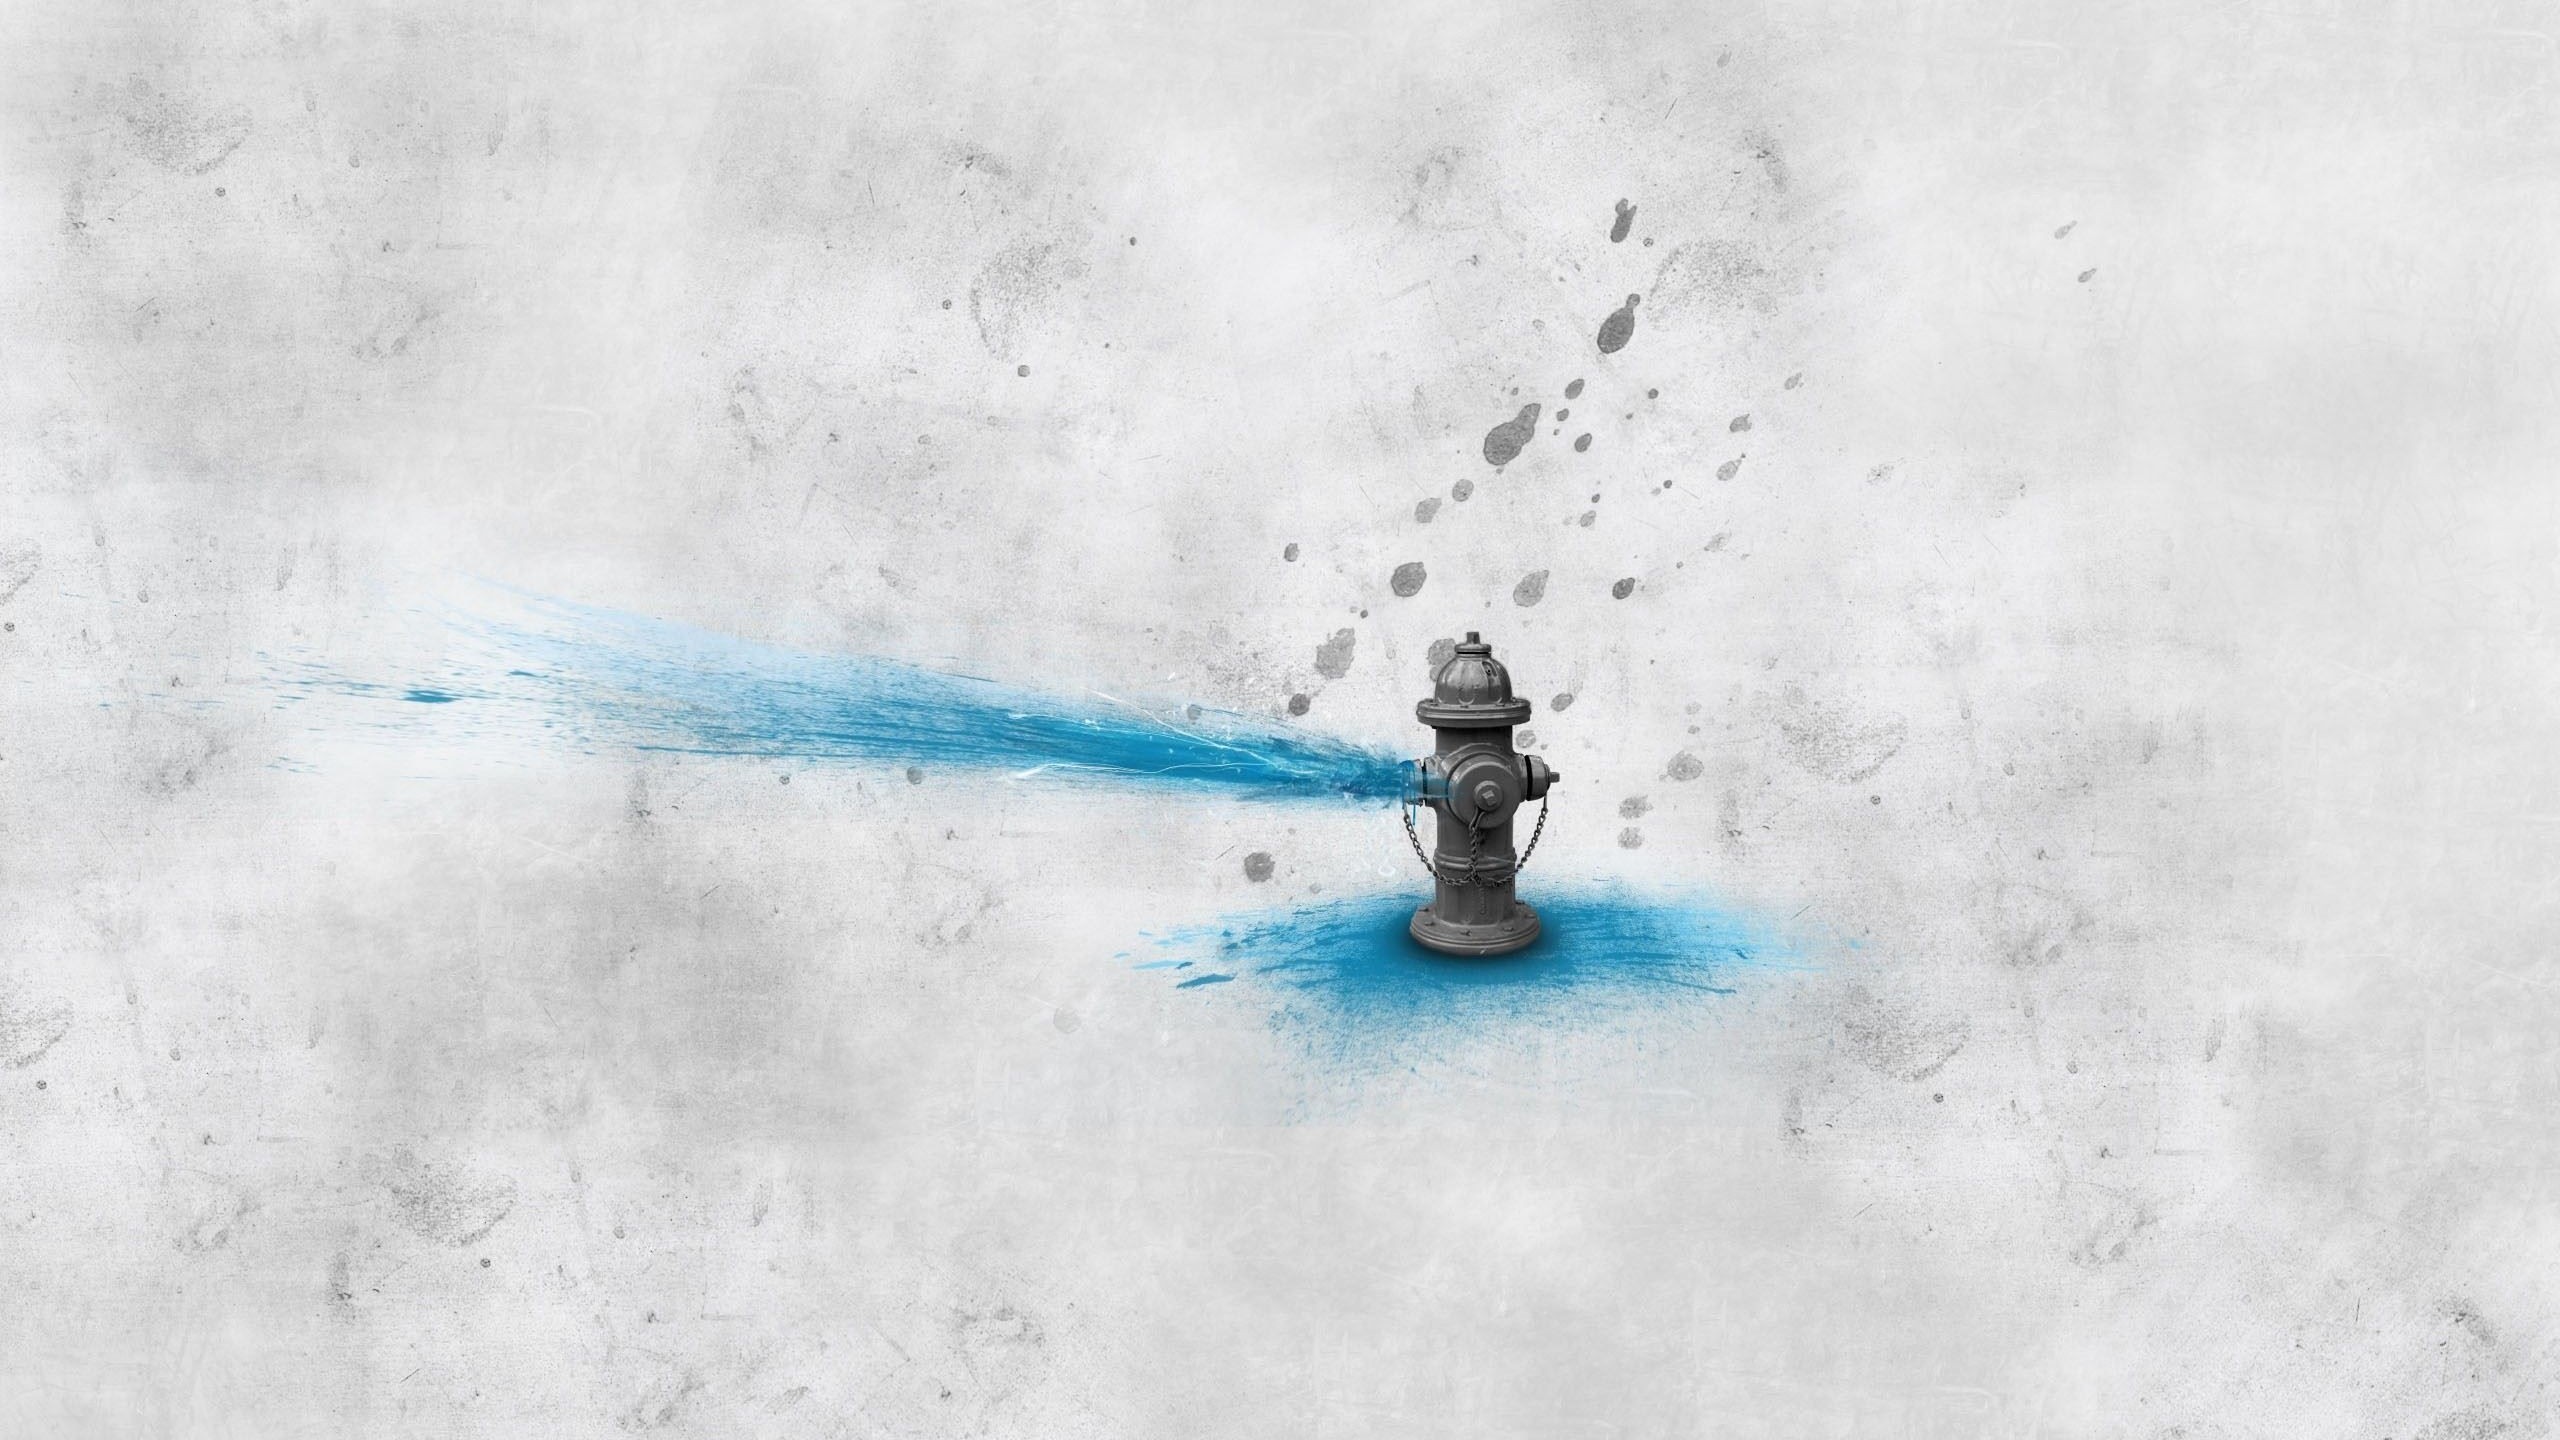 General 2560x1440 fire hydrants artwork blue gray water simple background